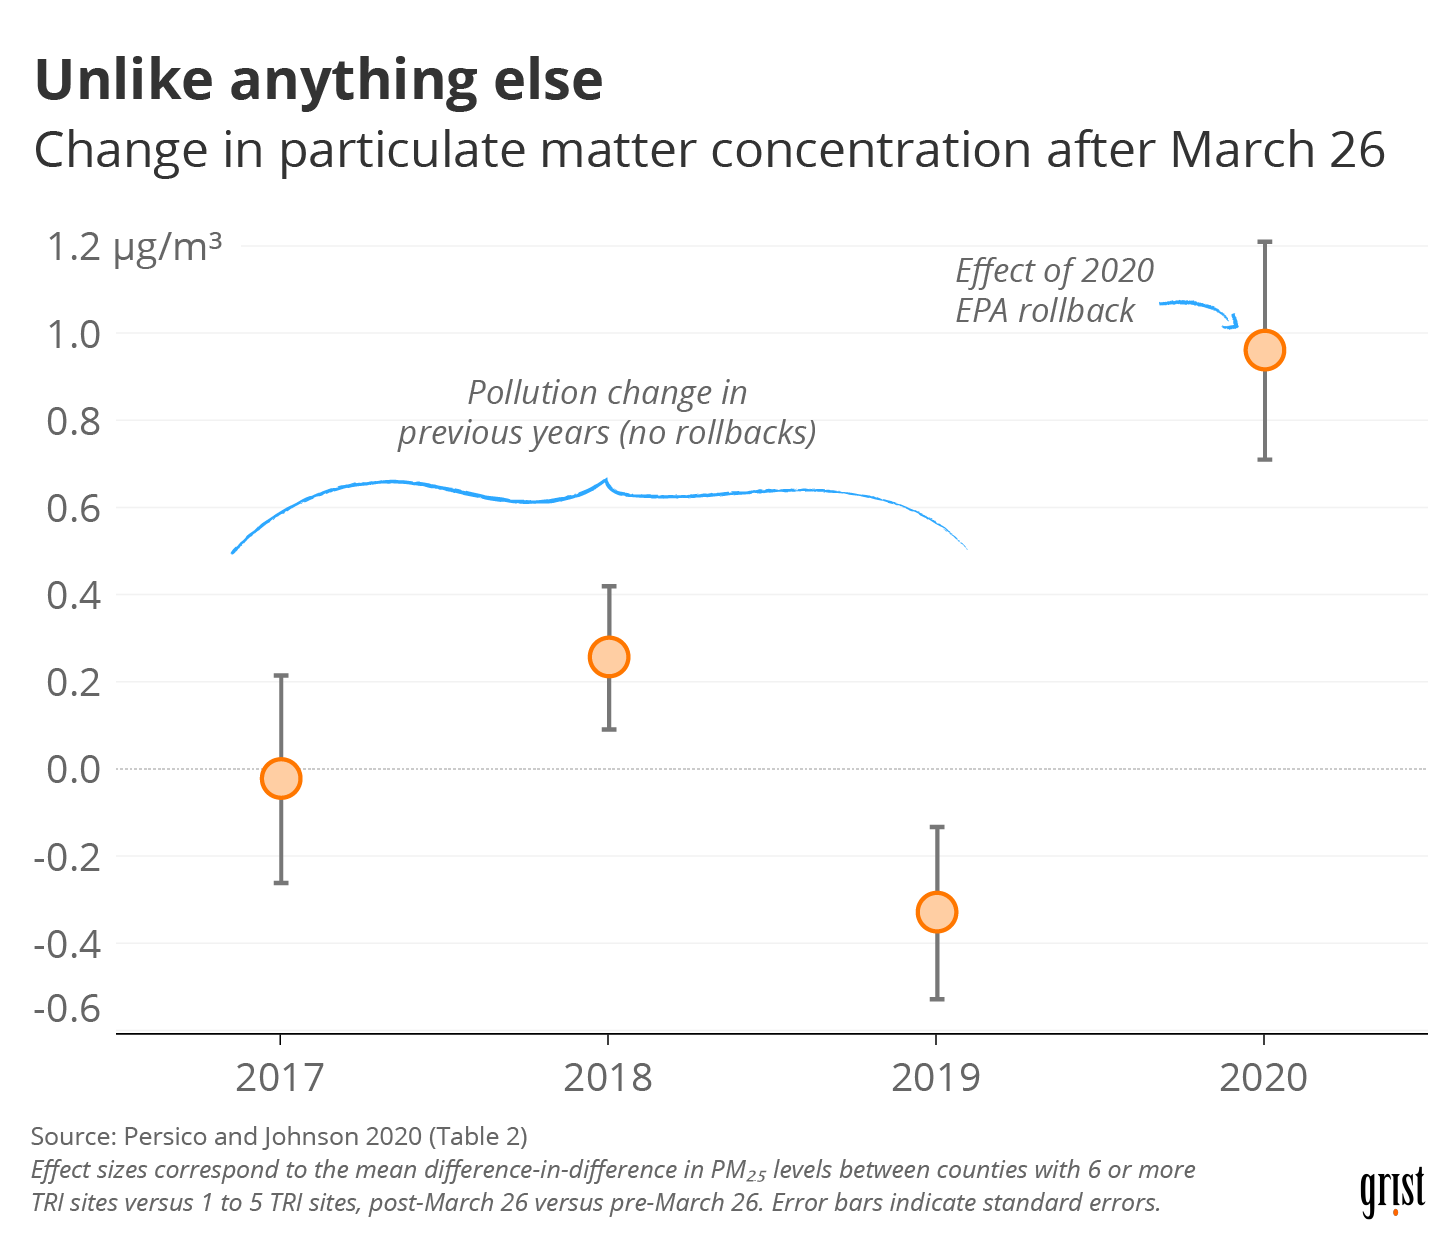 A chart showing the change in particulate matter concentration in the weeks following March 26 for the years 2017–2020. In 2020, due to an EPA rollback, pollution rose following March 26. In prior years, it didn't.